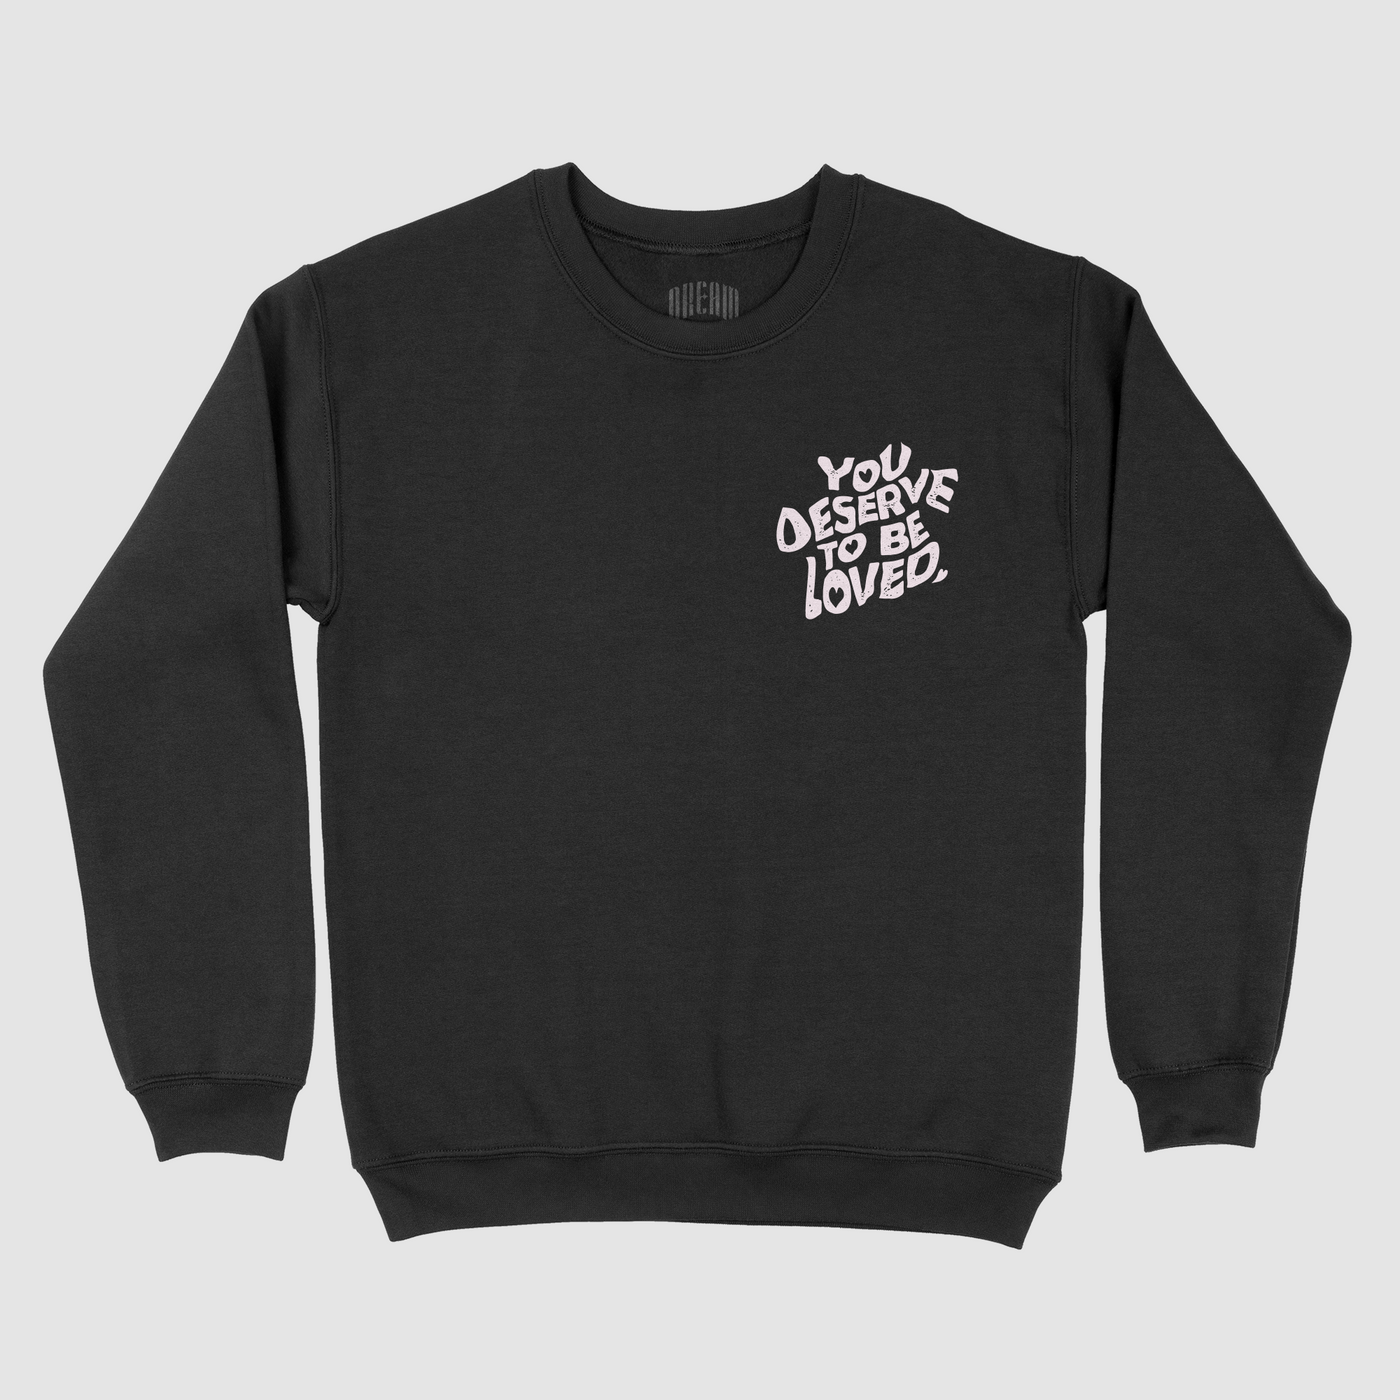 You Deserve To Be Loved Crewneck Sweater
Thank you for existing. You're worth far more than you could imagine. Believe in yourself and the imprint you're leaving on this world and those around you. You desDREAM Clothing 